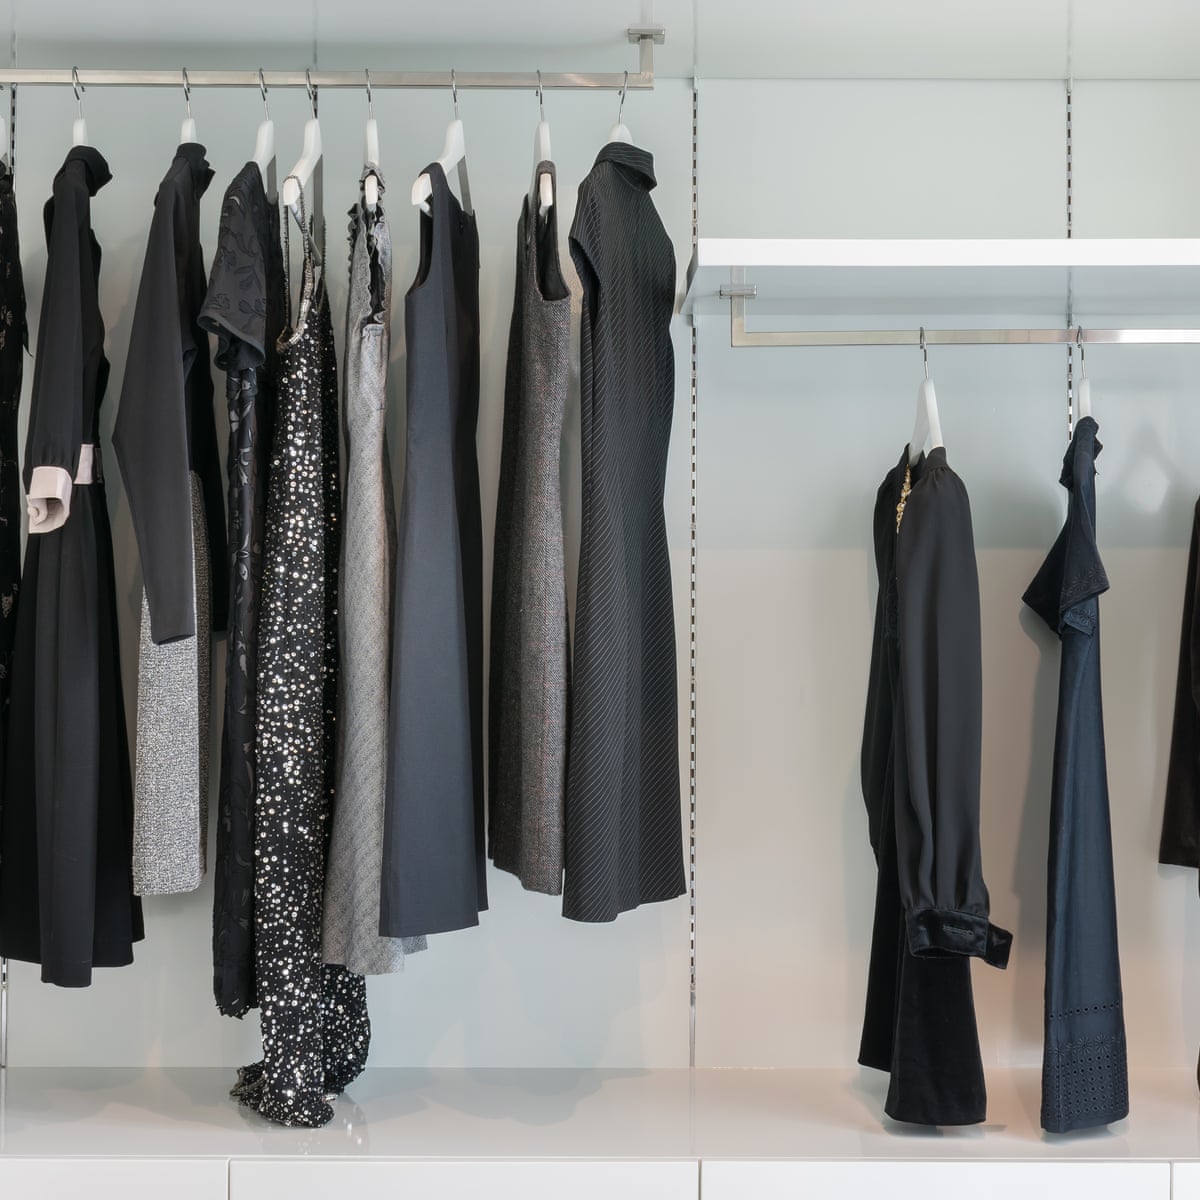 Deep in the dark: how to keep black clothes looking their best for longer |  Fashion | The Guardian